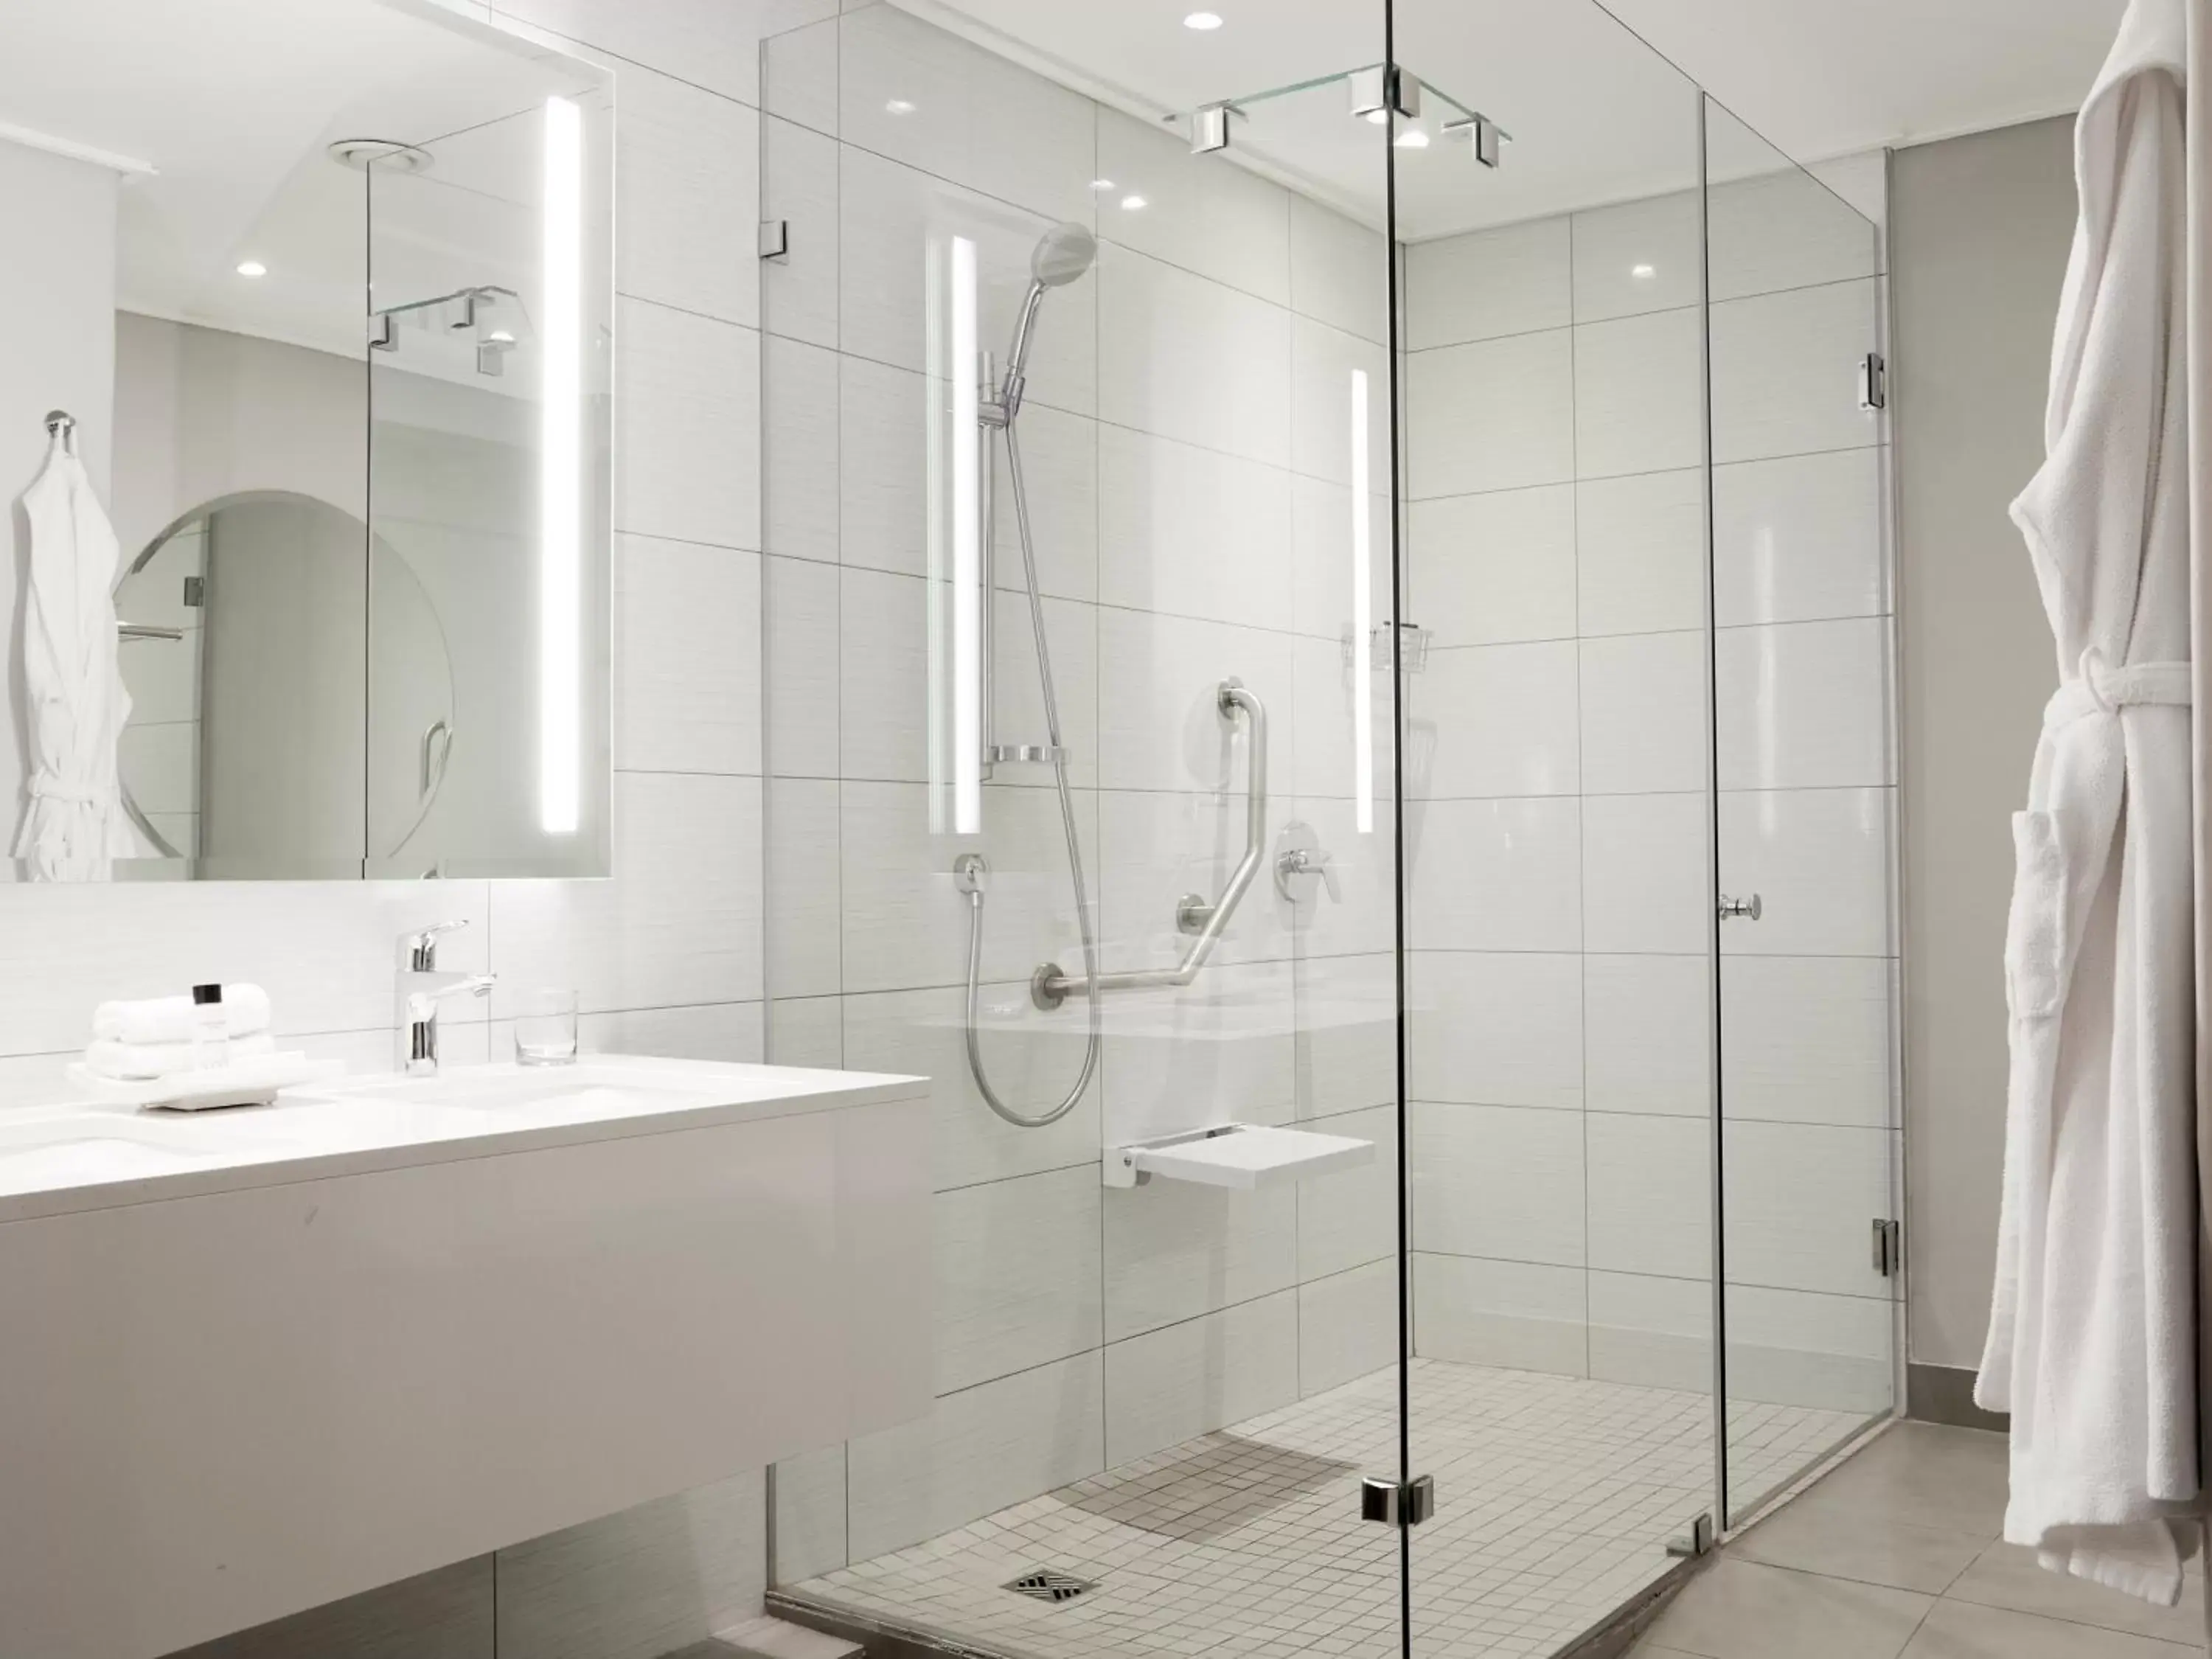 Bathroom in Victoria & Alfred Hotel by NEWMARK